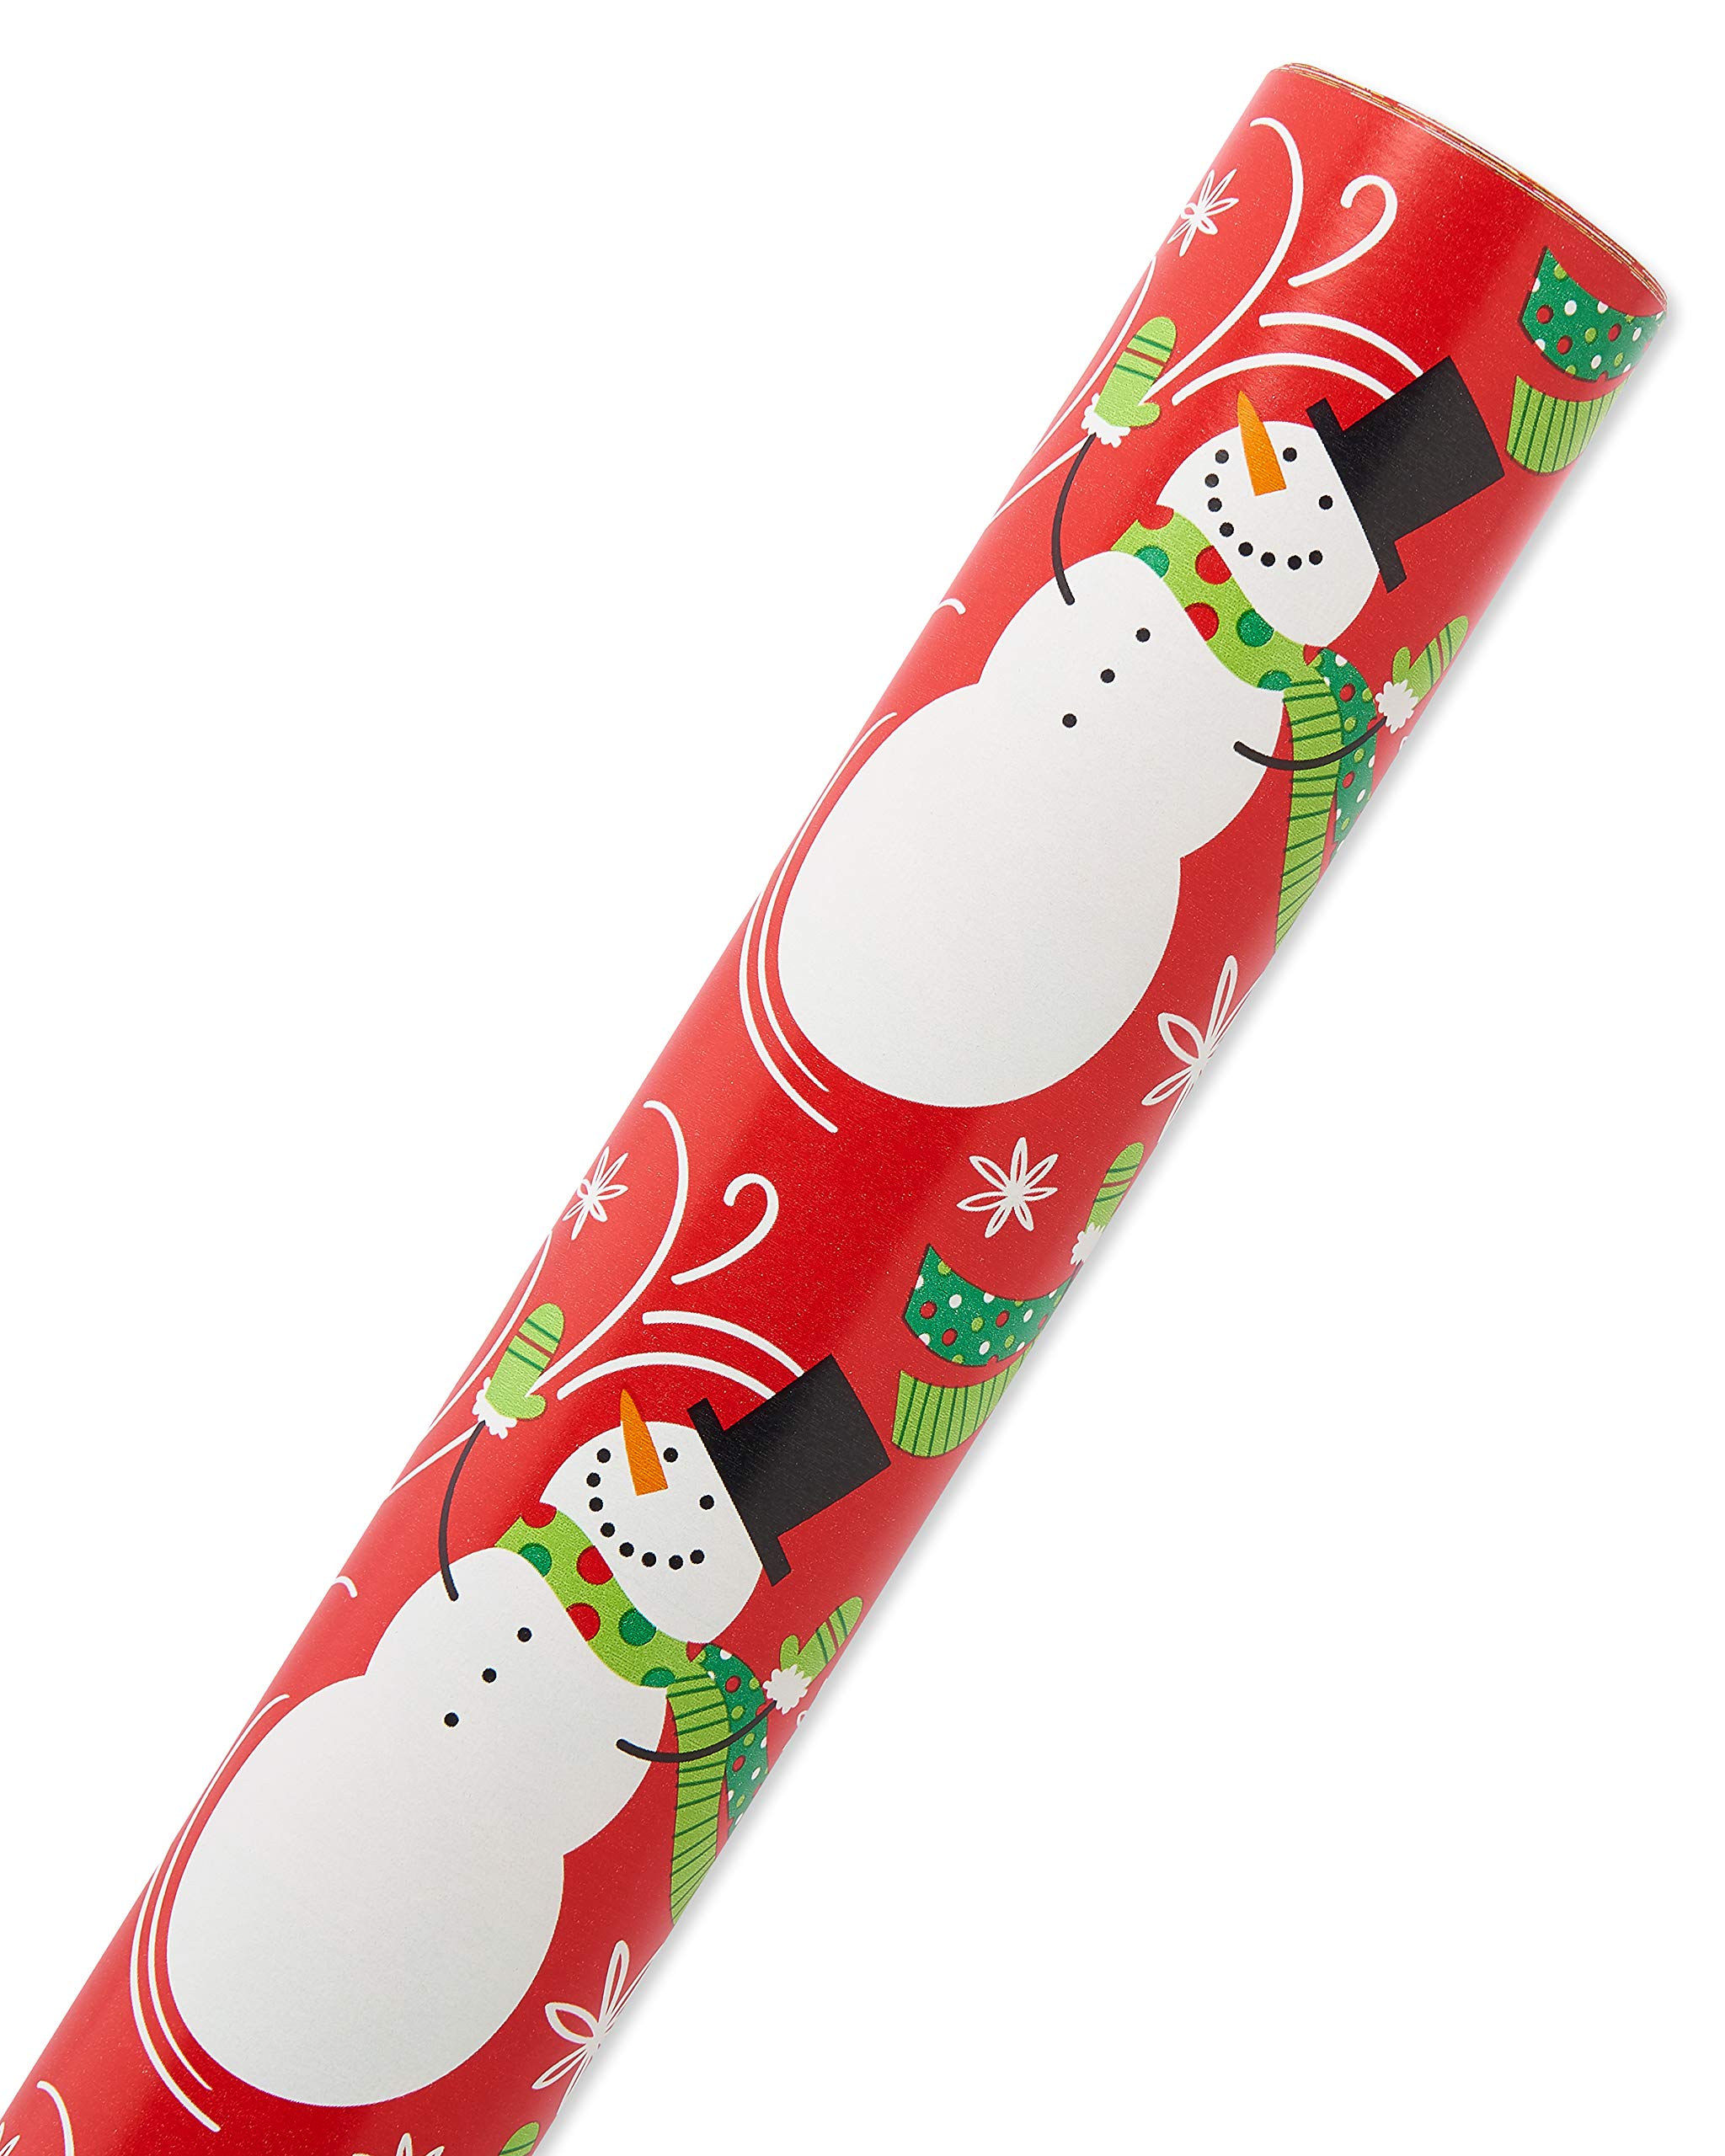 American Greetings Christmas Wrapping Paper Bundle, Rustic Designs (4 Rolls, 160 sq. ft) & Christmas Reversible Wrapping Paper Jumbo Roll, Snowflakes (1 Roll, 175 sq. ft.)